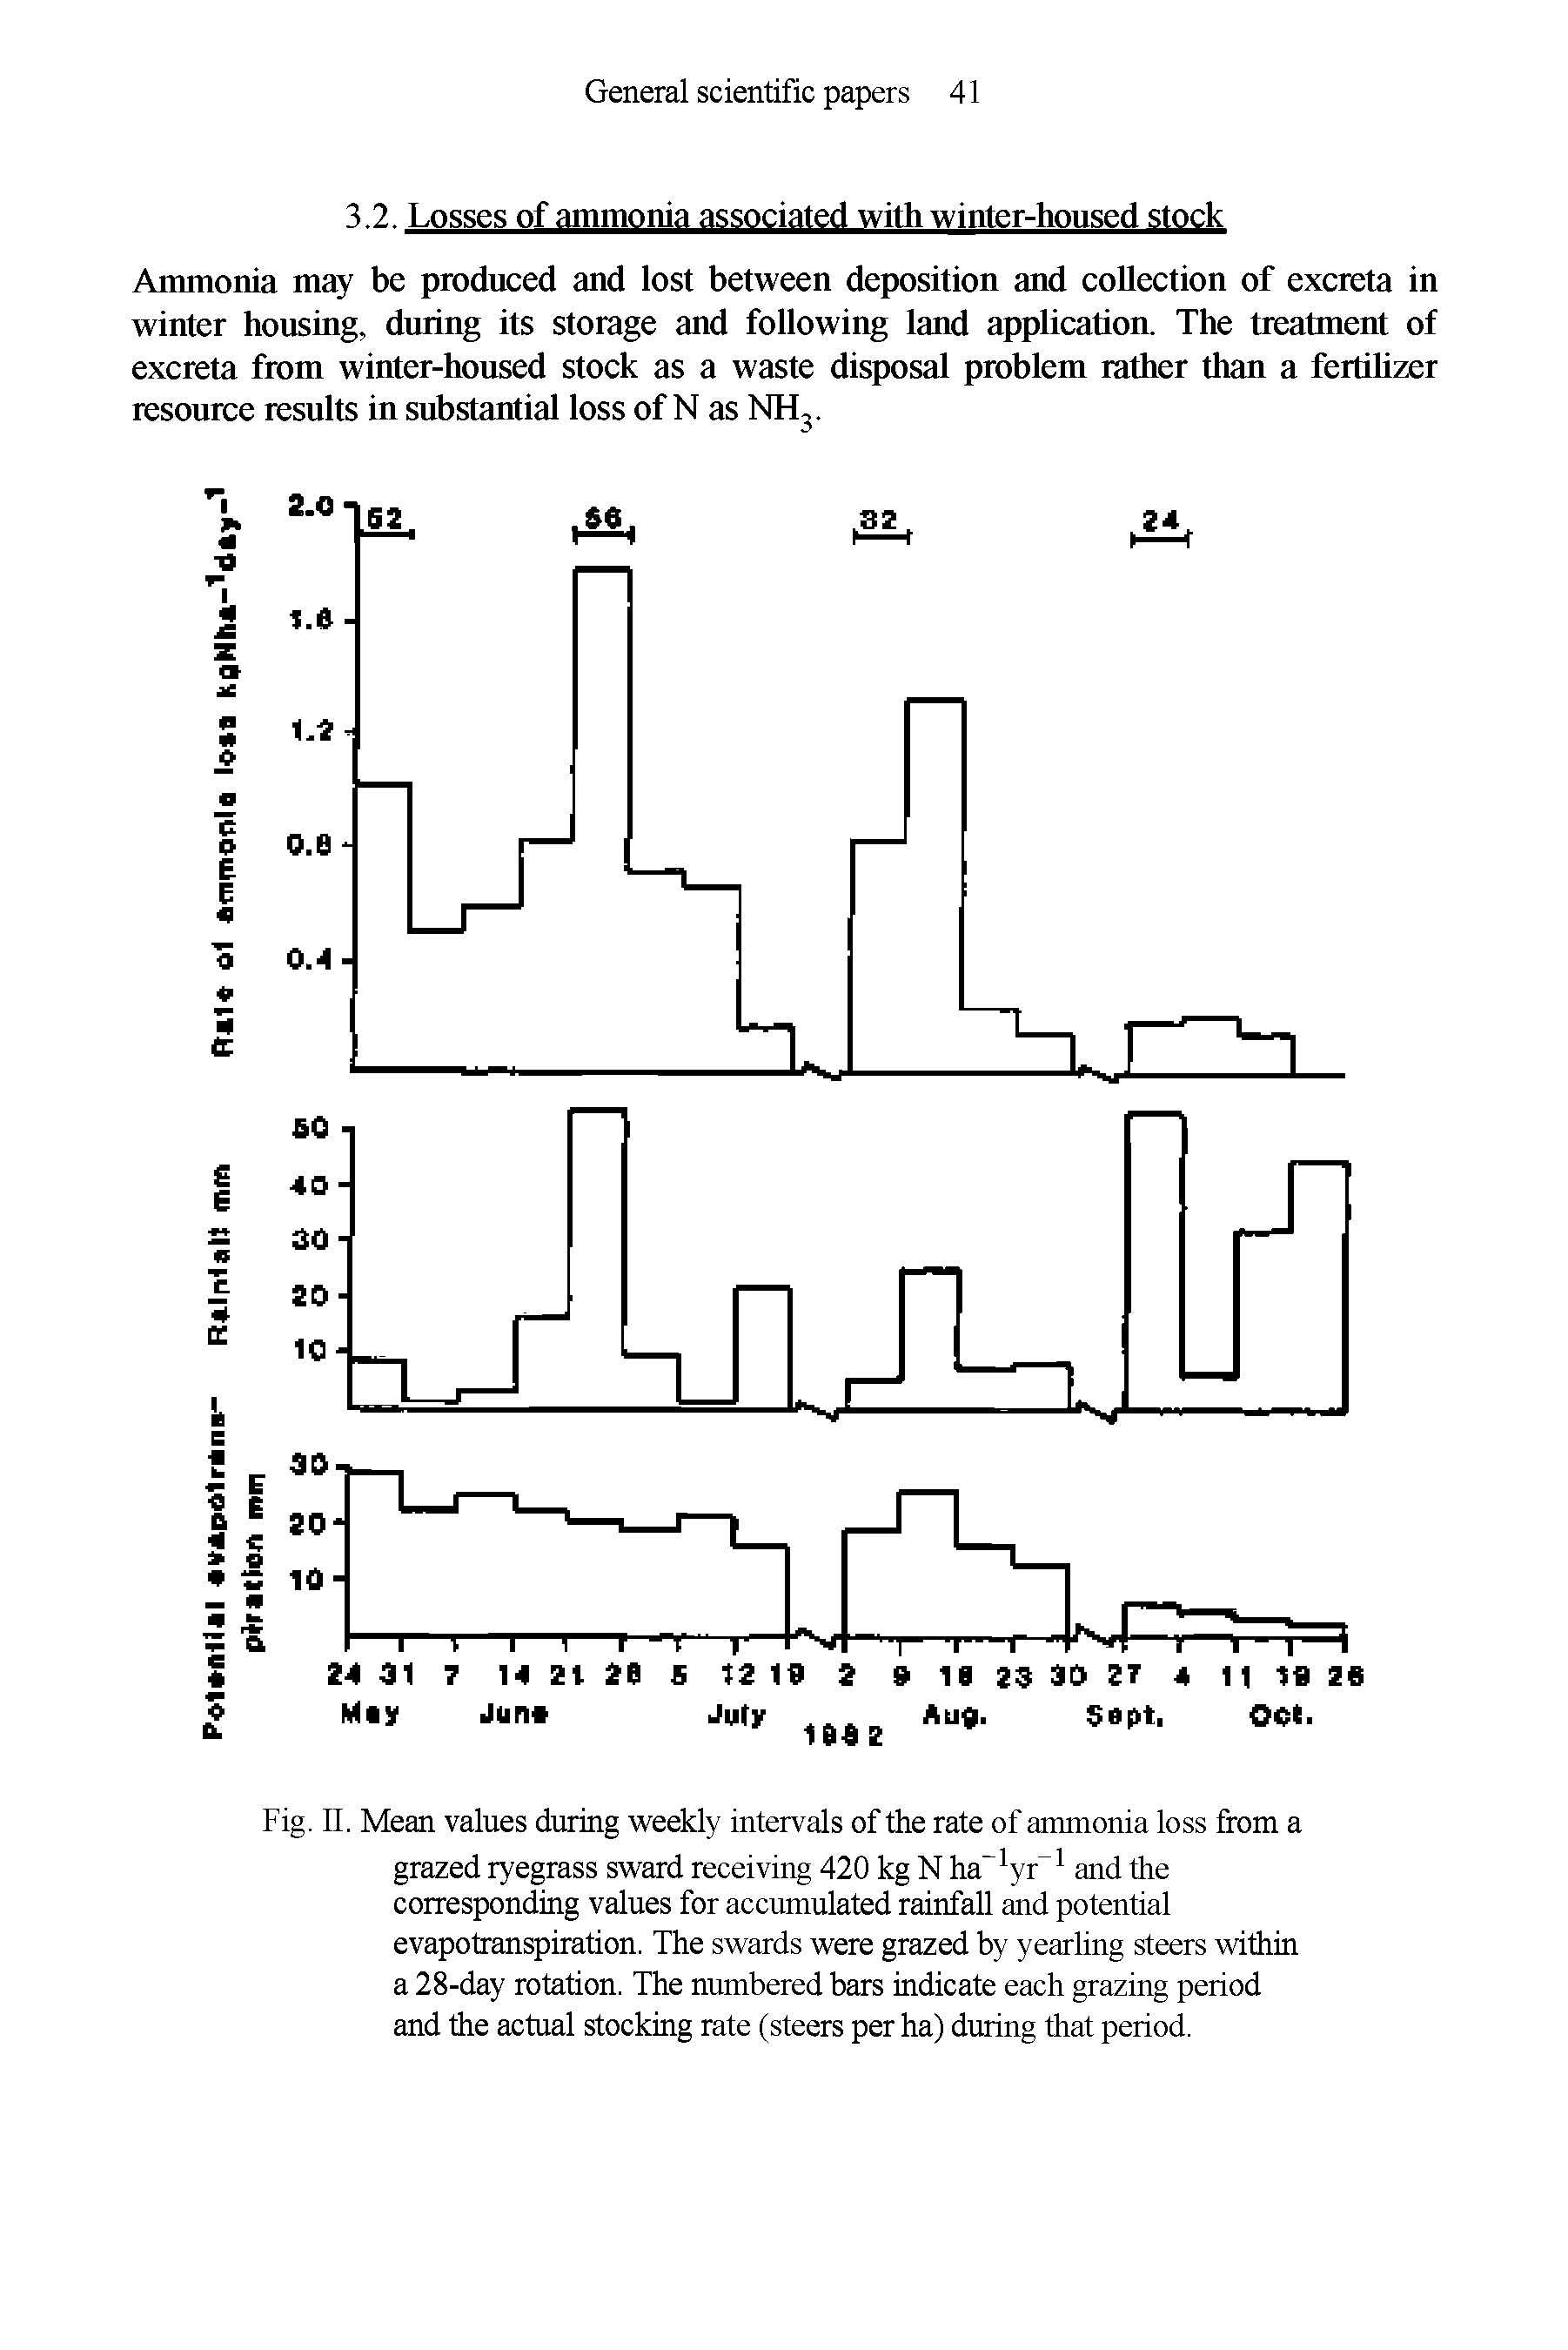 Fig. II. Mean values during weekly intervals of the rate of ammonia loss from a grazed ryegrass sward receiving 420 kg N ha 1yr 1 and the corresponding values for accumulated rainfall and potential evapotranspiration. The swards were grazed by yearling steers within a 28-day rotation. The numbered bars indicate each grazing period and the actual stocking rate (steers per ha) during that period.